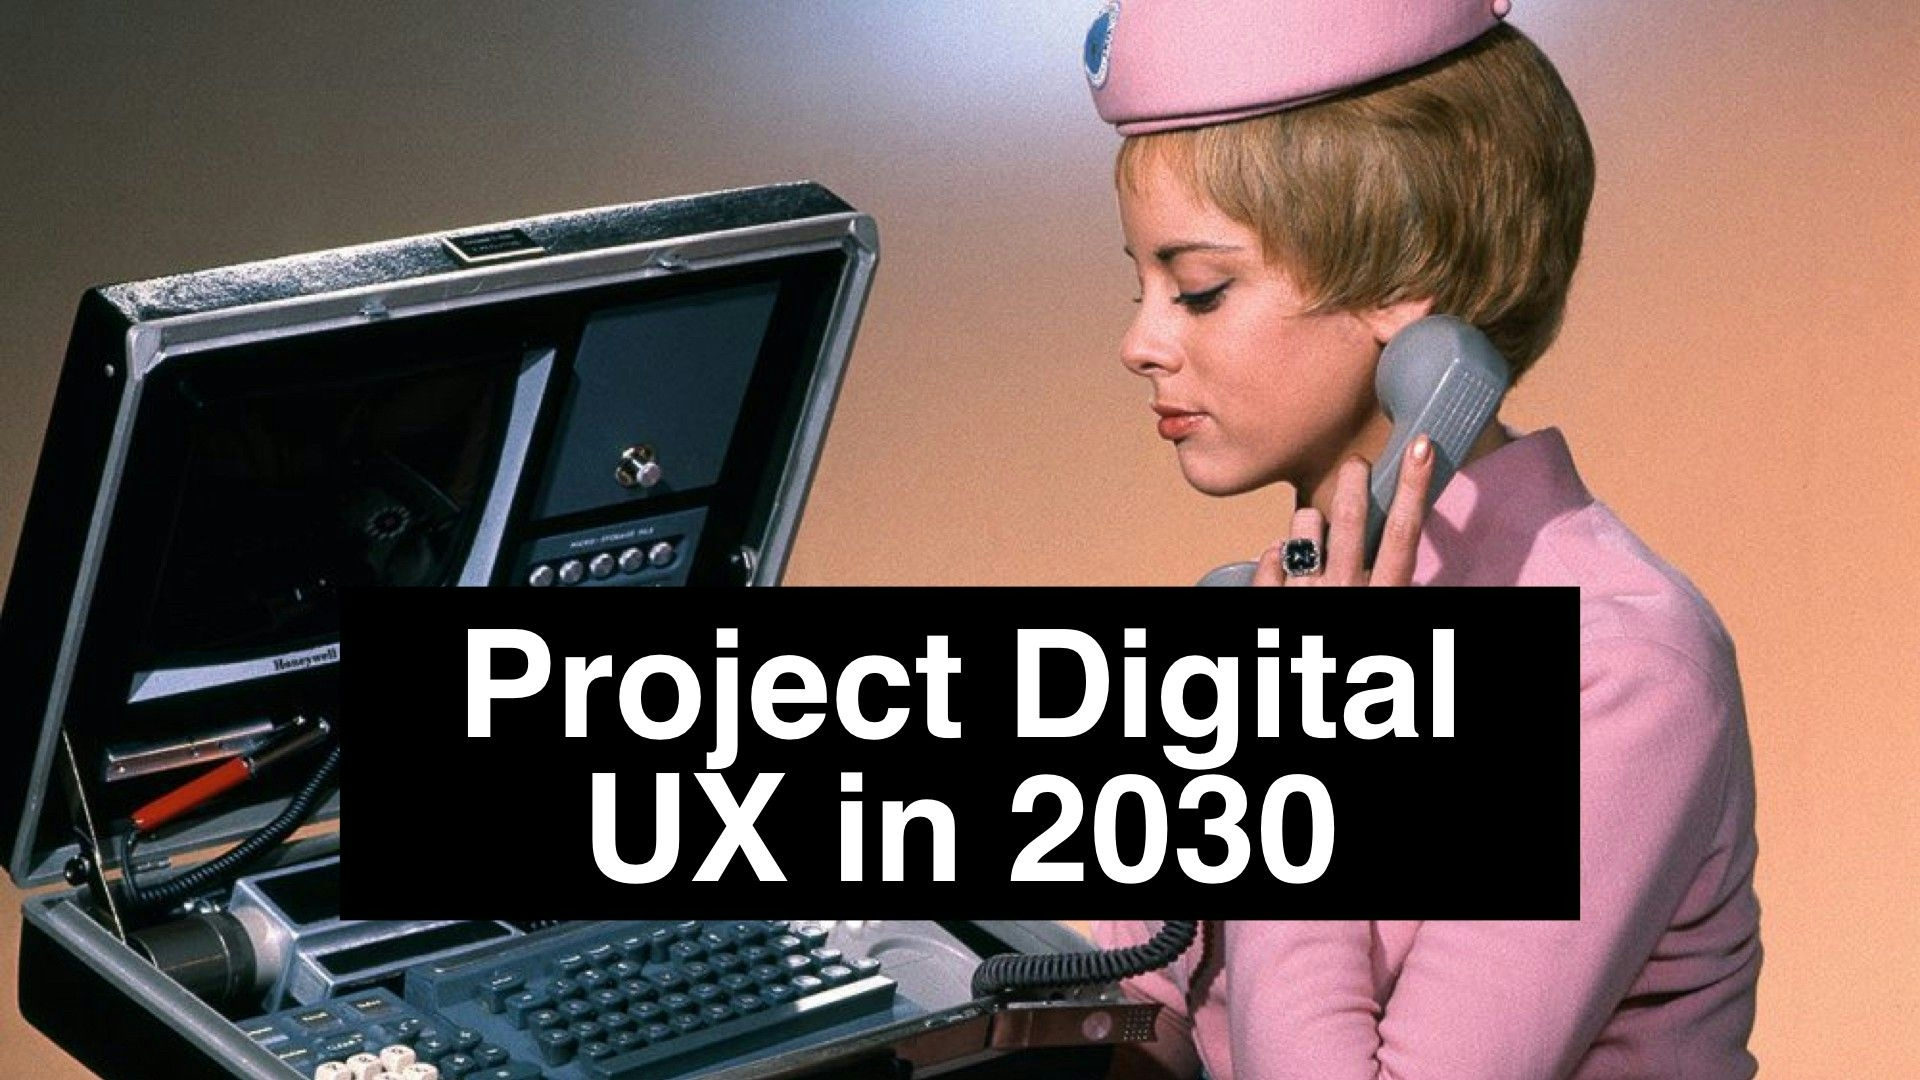 Designing a UX for digital users in 2030, with a multi-office, cross-competence team.